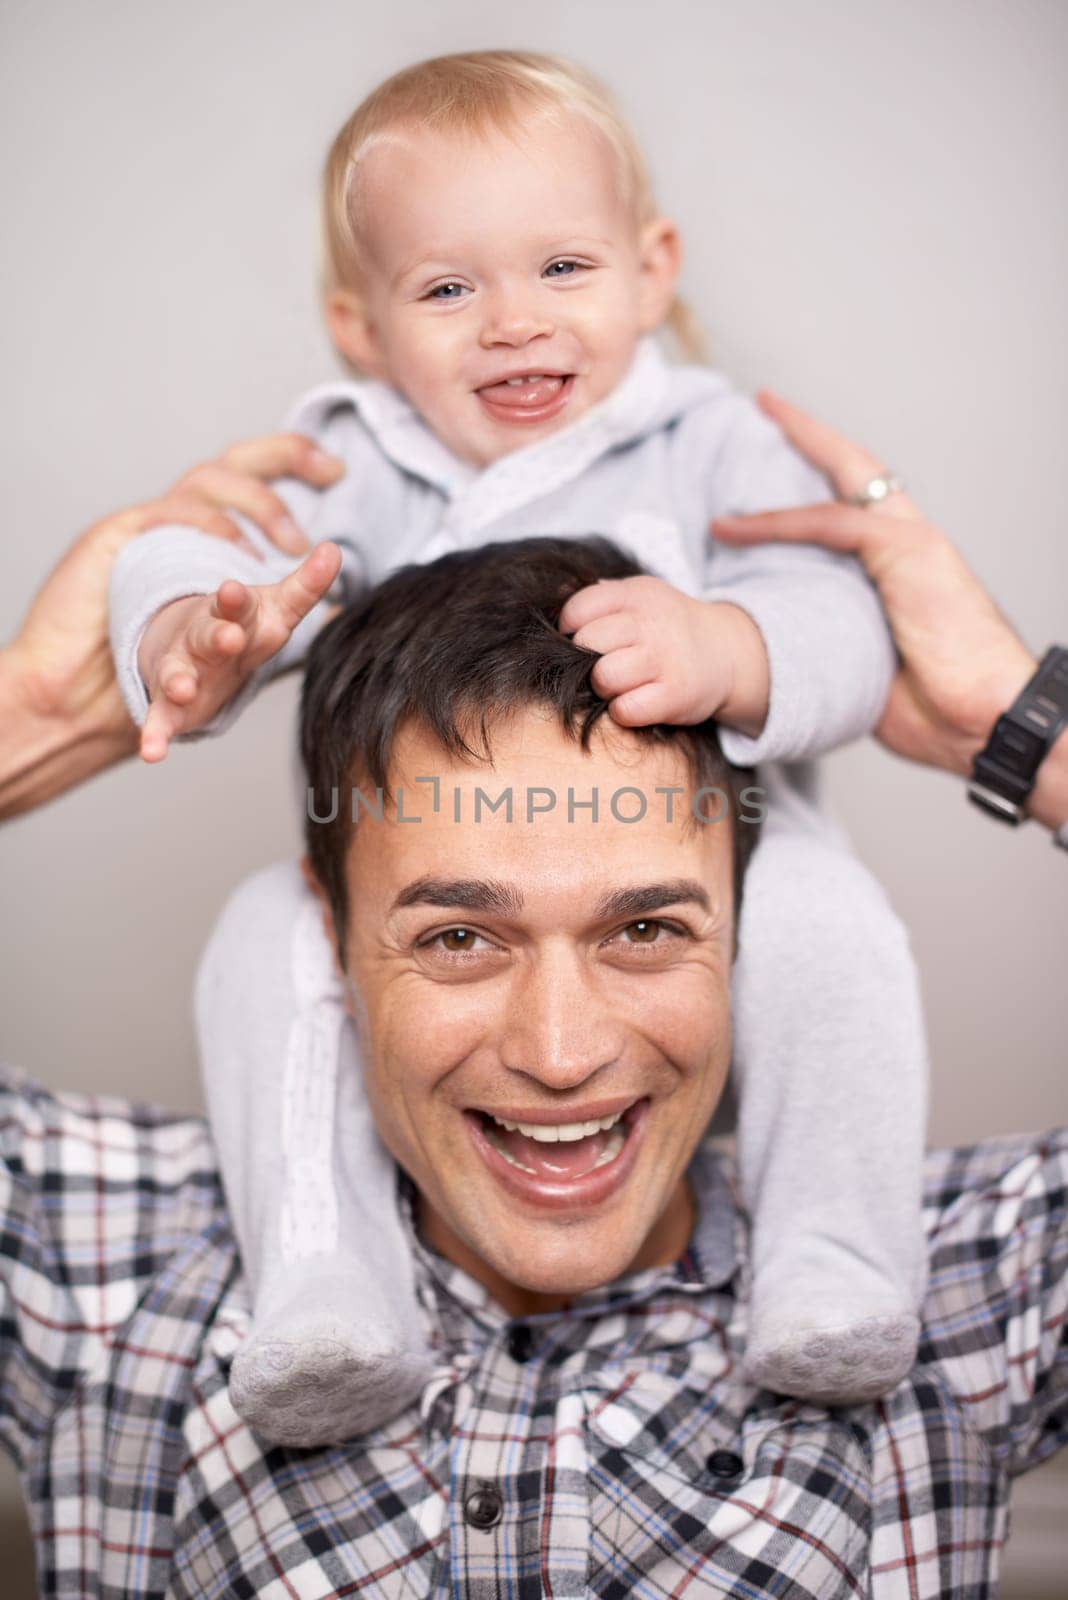 Love, portrait or father and baby with piggyback, playing or bonding at home with shoulder games. Child development, learning and face of dad with girl having fun, support and laughing in family time.